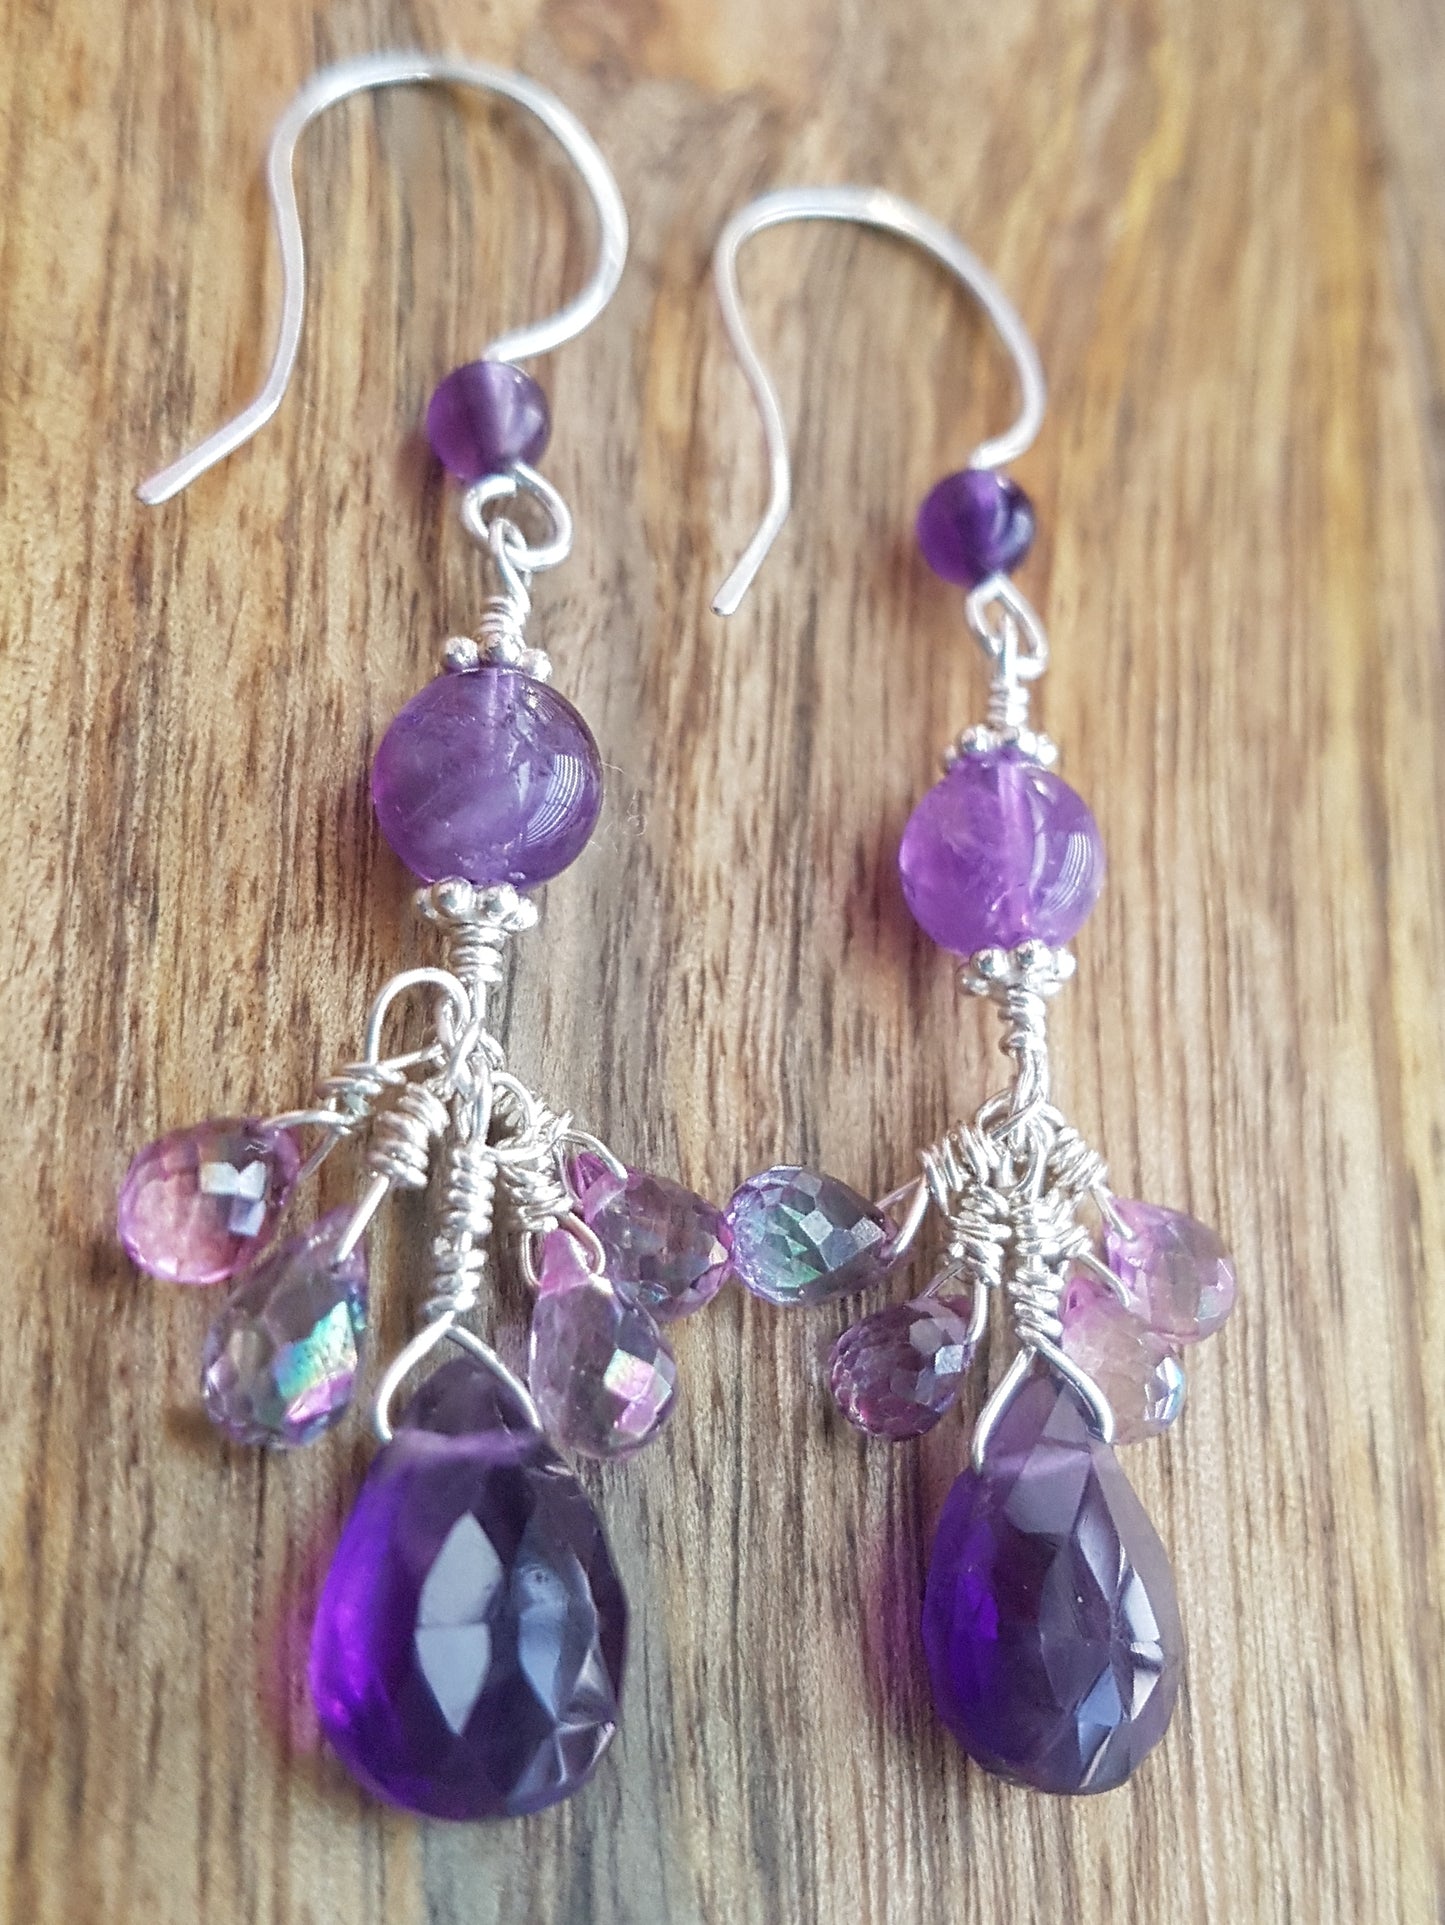 Mystic Topaz Amethyst Exotic Earrings-Handcrafted with High Quality, Faceted Gemstones: Genuine Amethyst & Mystic Topaz